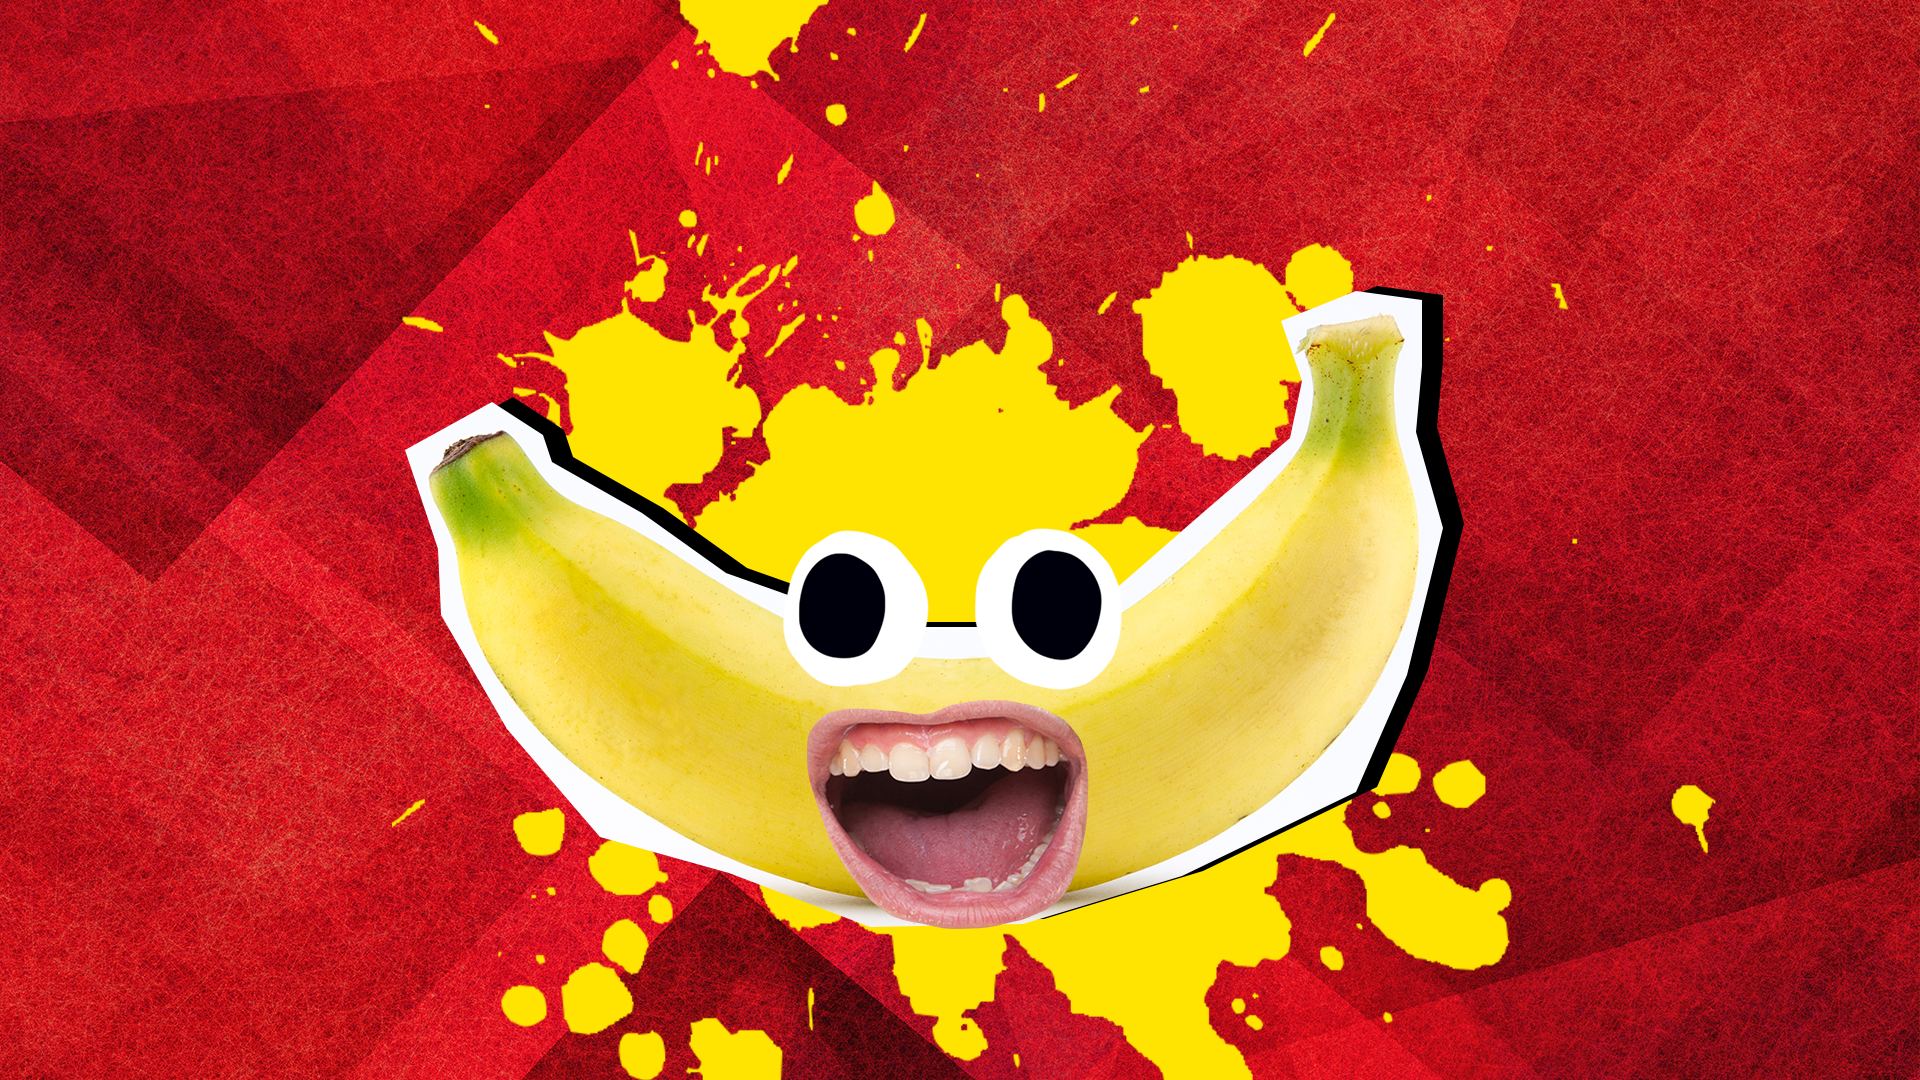 An excited looking banana in front of a red background